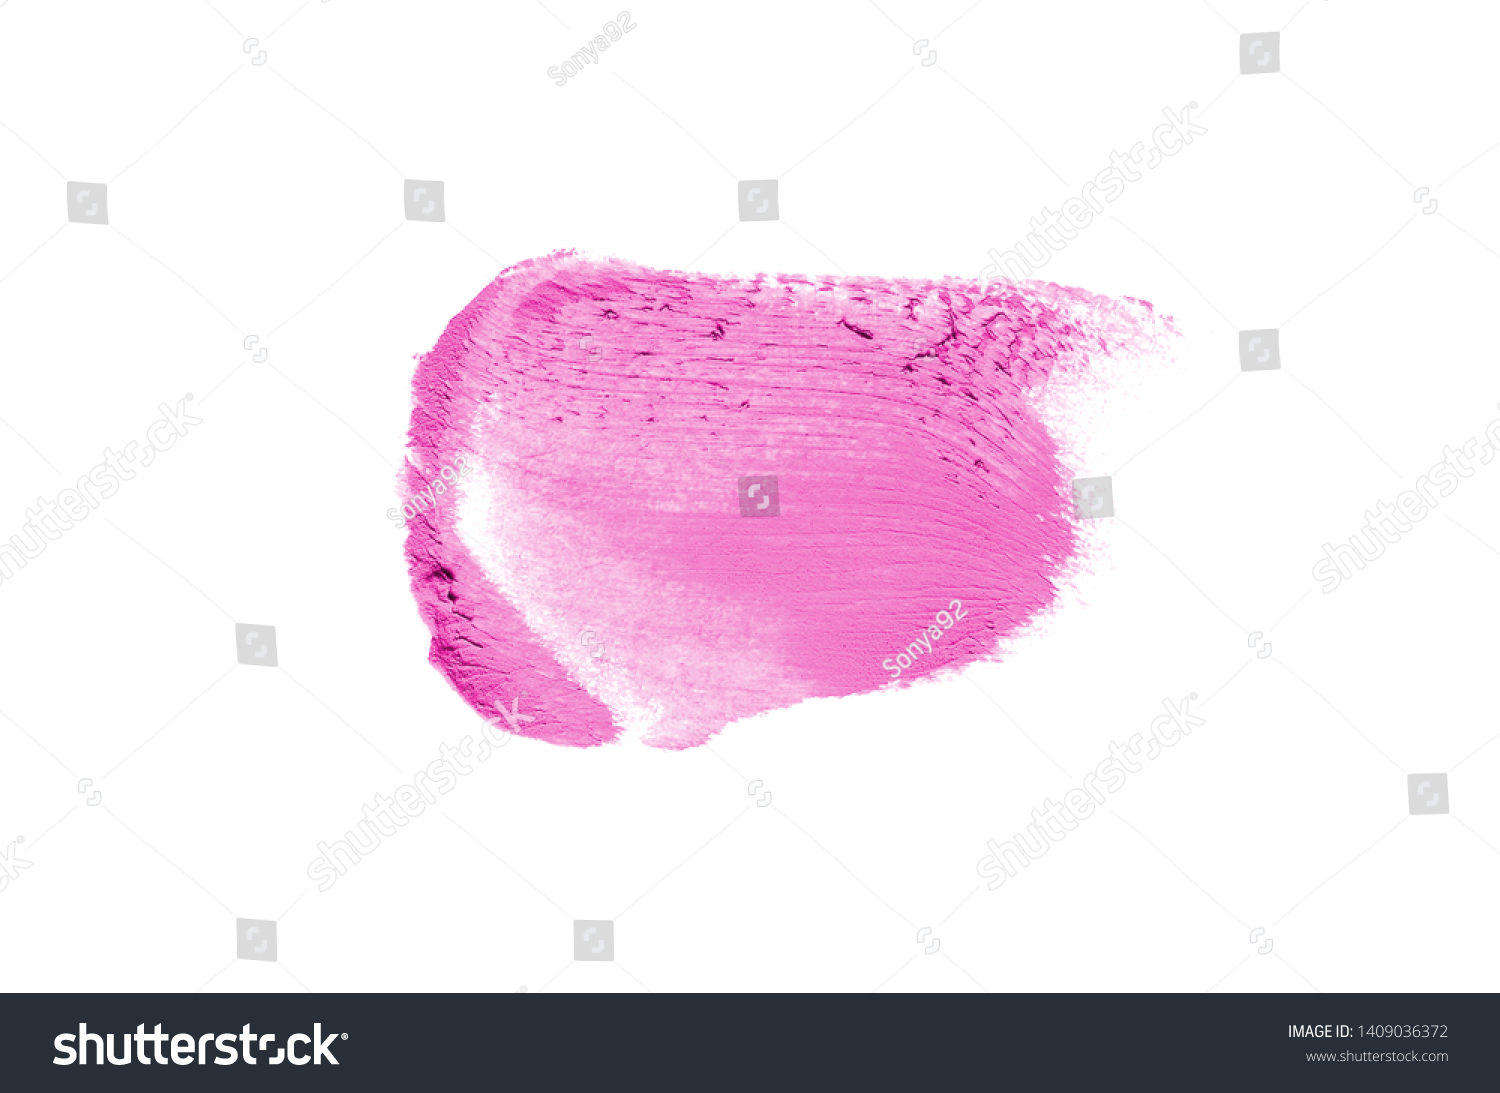 Smear and texture of lipstick or acrylic paint isolated on white background. Stroke of lipgloss or liquid nail polish swatch smudge sample. Element for beauty cosmetic design. Pink color #1409036372